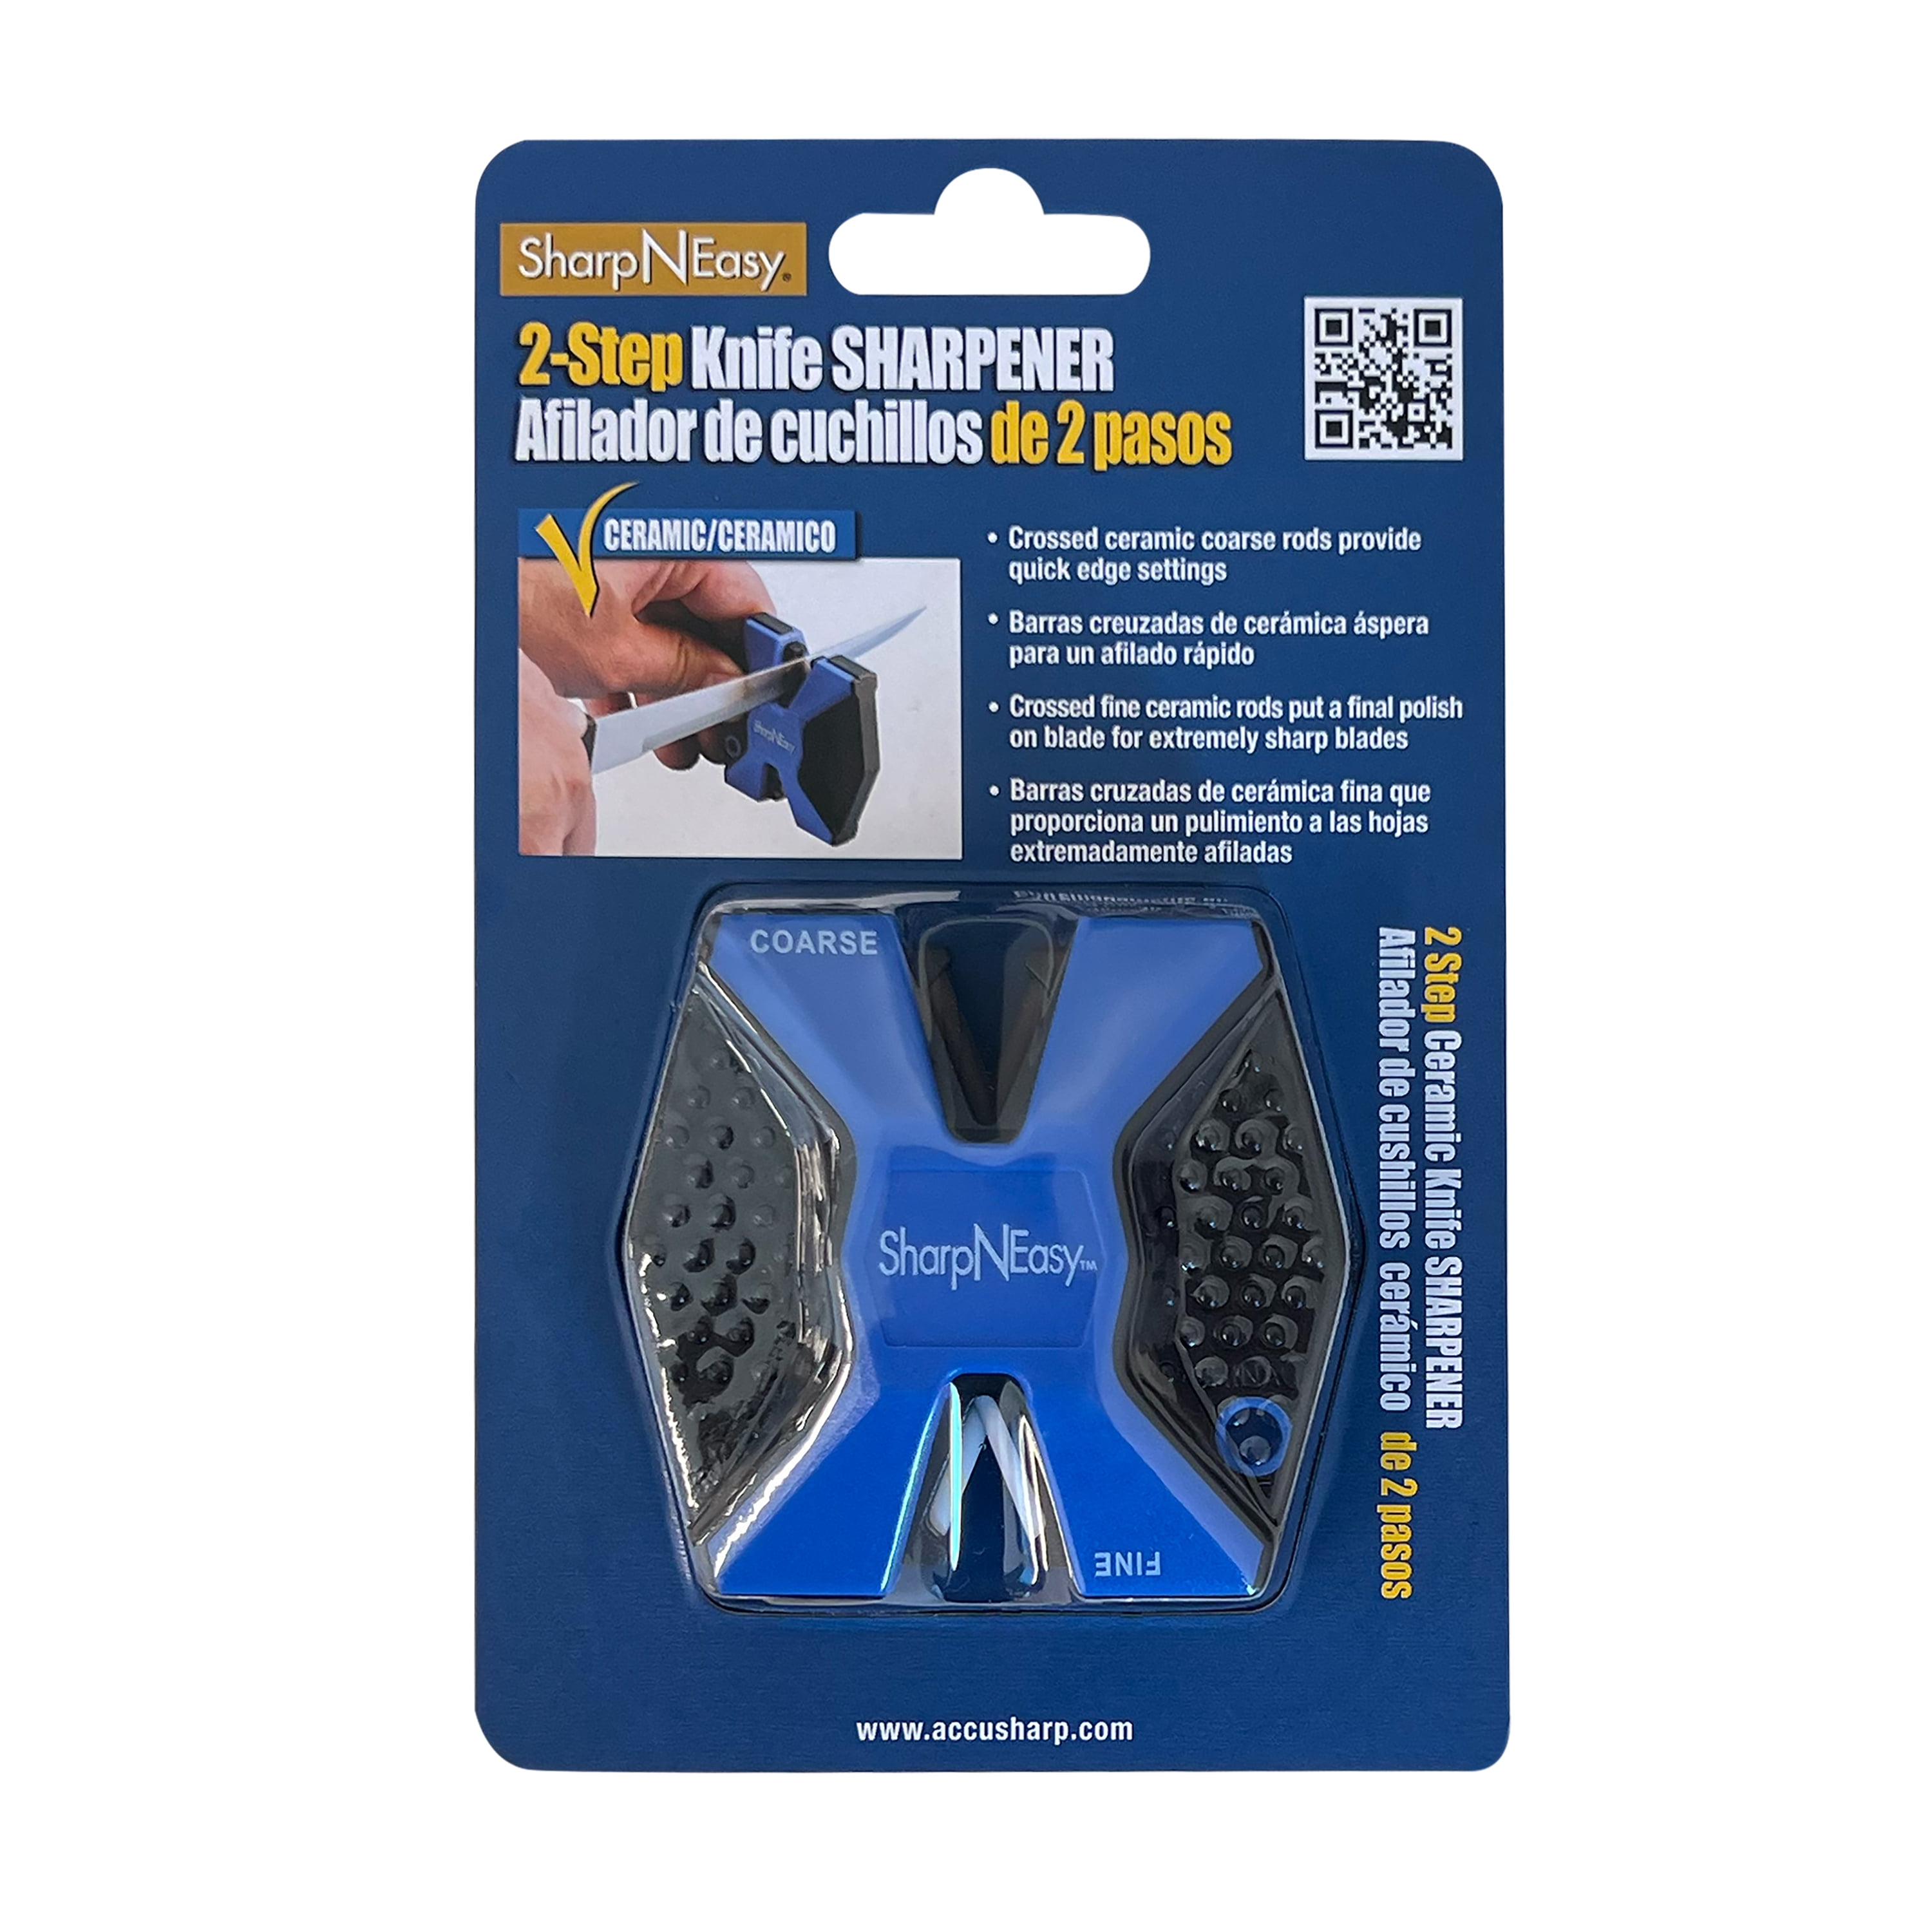 AccuSharp Diamond Pro 2-Step Knife Sharpener - Sharpens, Restores, & Hones  - 2-Step Coarse and Fine Rods for Kitchen Knives & All Types of Blades 